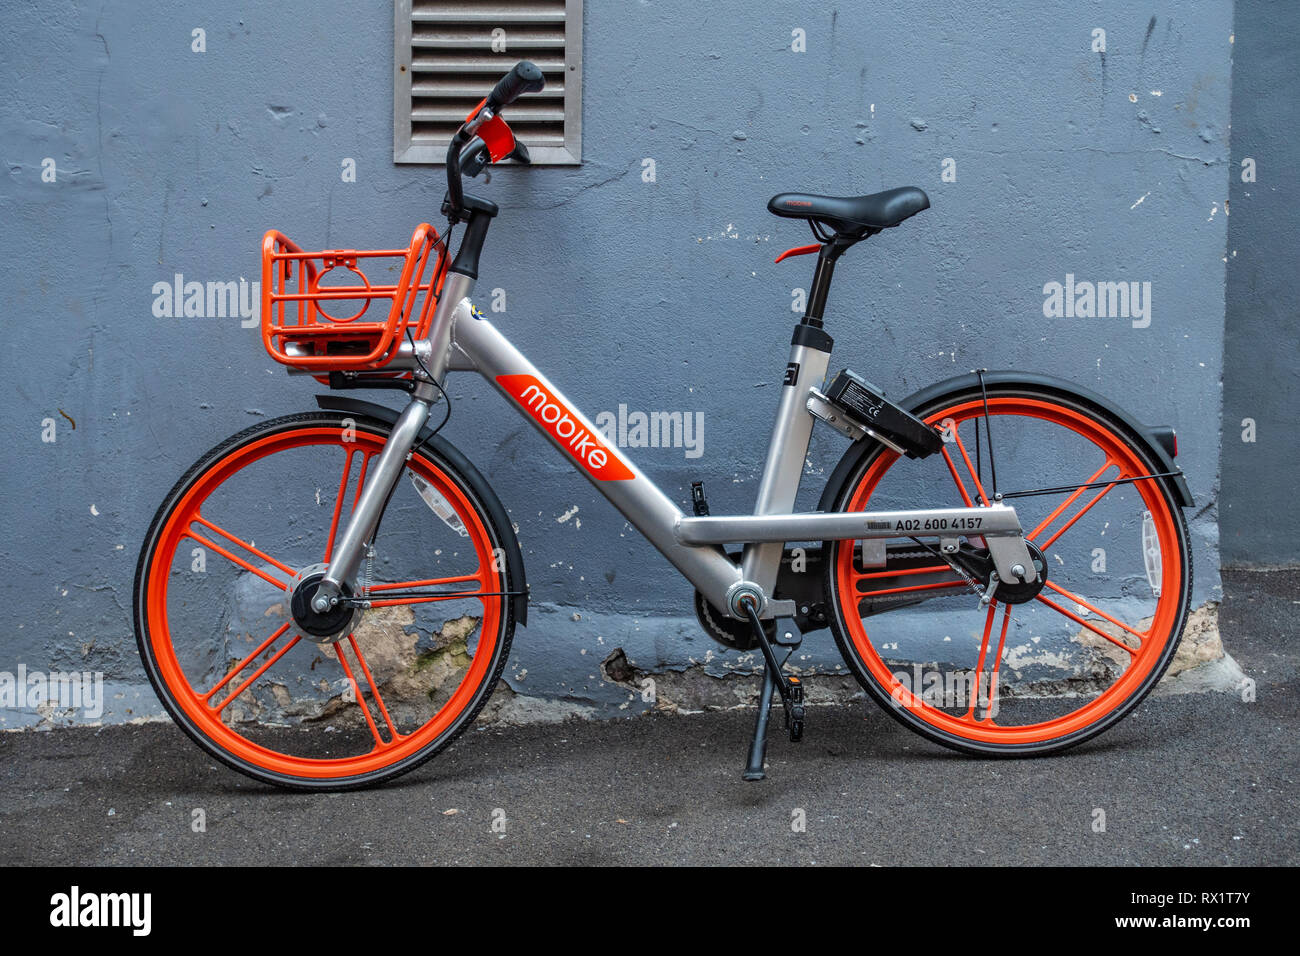 Bike sharing with shared transportation for convenient short urban trips on this Mobike hire pushbike leaning against a wall in Soho, London Stock Photo